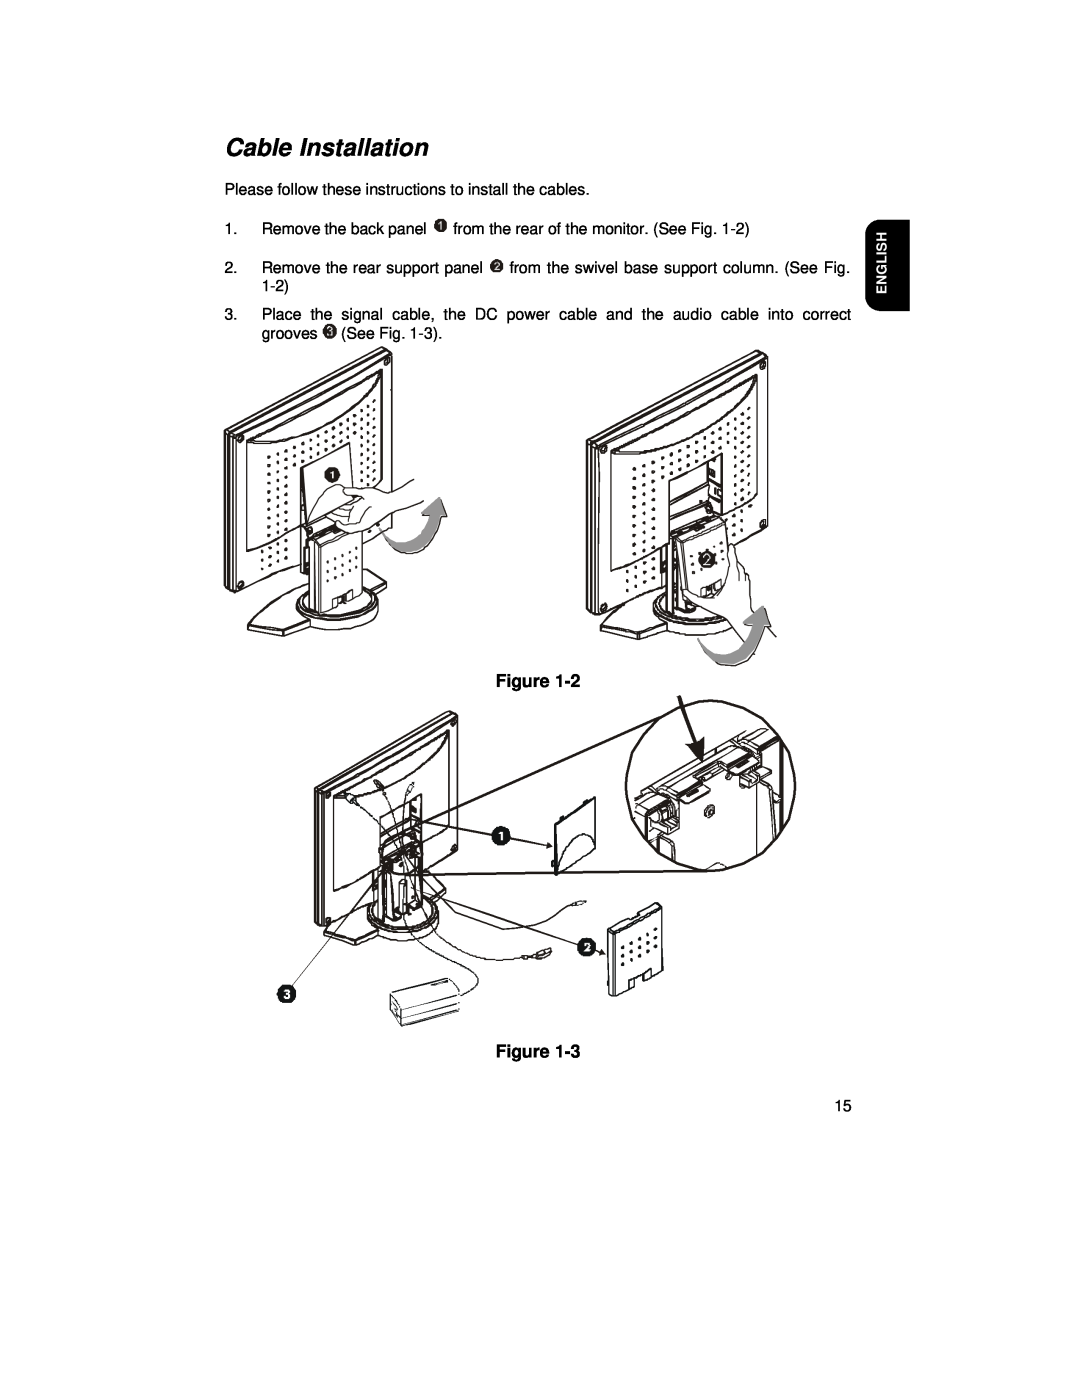 Hitachi CML152XW manual Cable Installation, Please follow these instructions to install the cables, English 